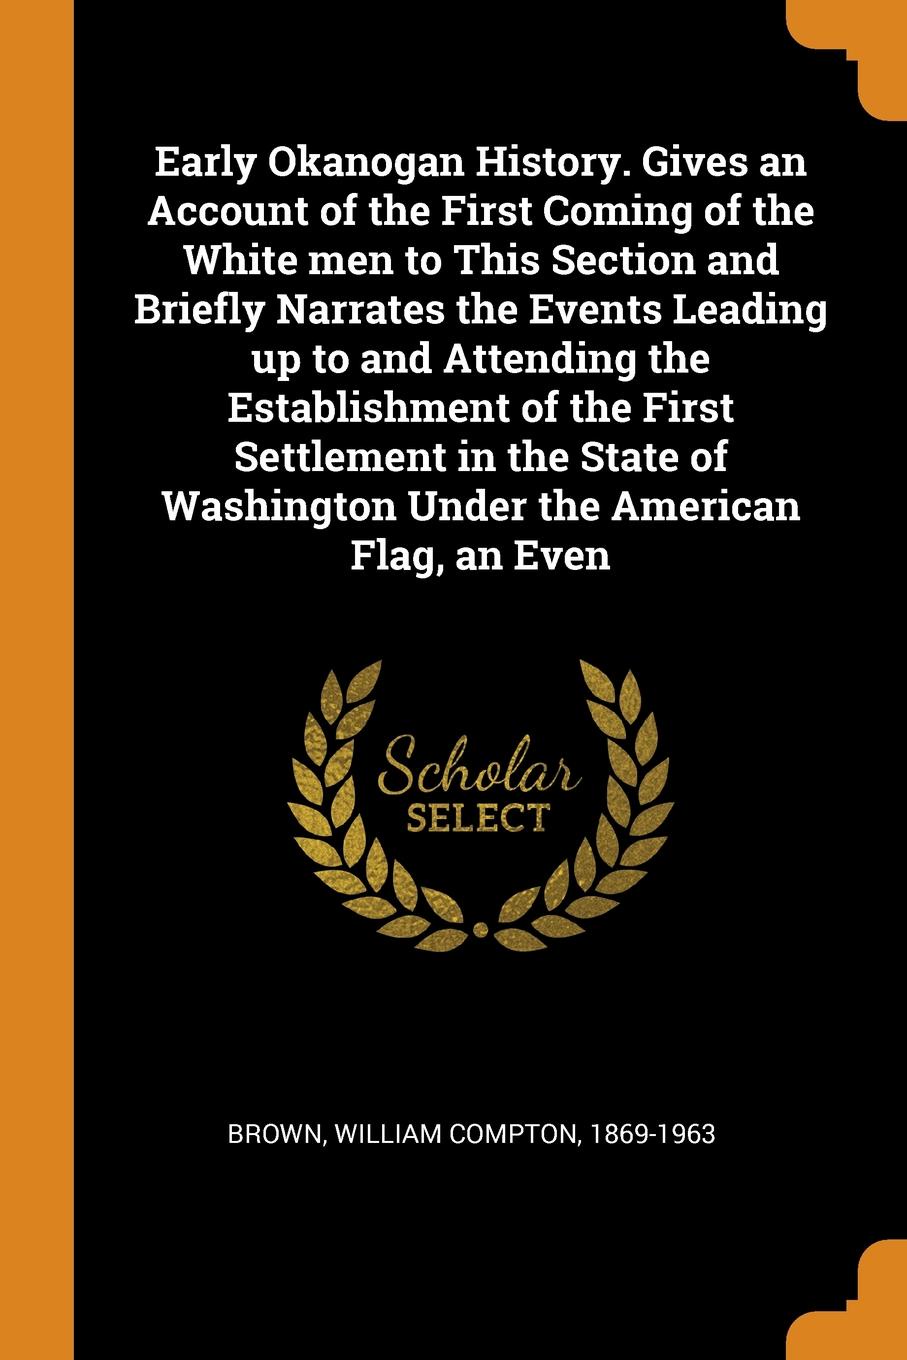 Early Okanogan History. Gives an Account of the First Coming of the White men to This Section and Briefly Narrates the Events Leading up to and Attending the Establishment of the First Settlement in the State of Washington Under the American Flag,...